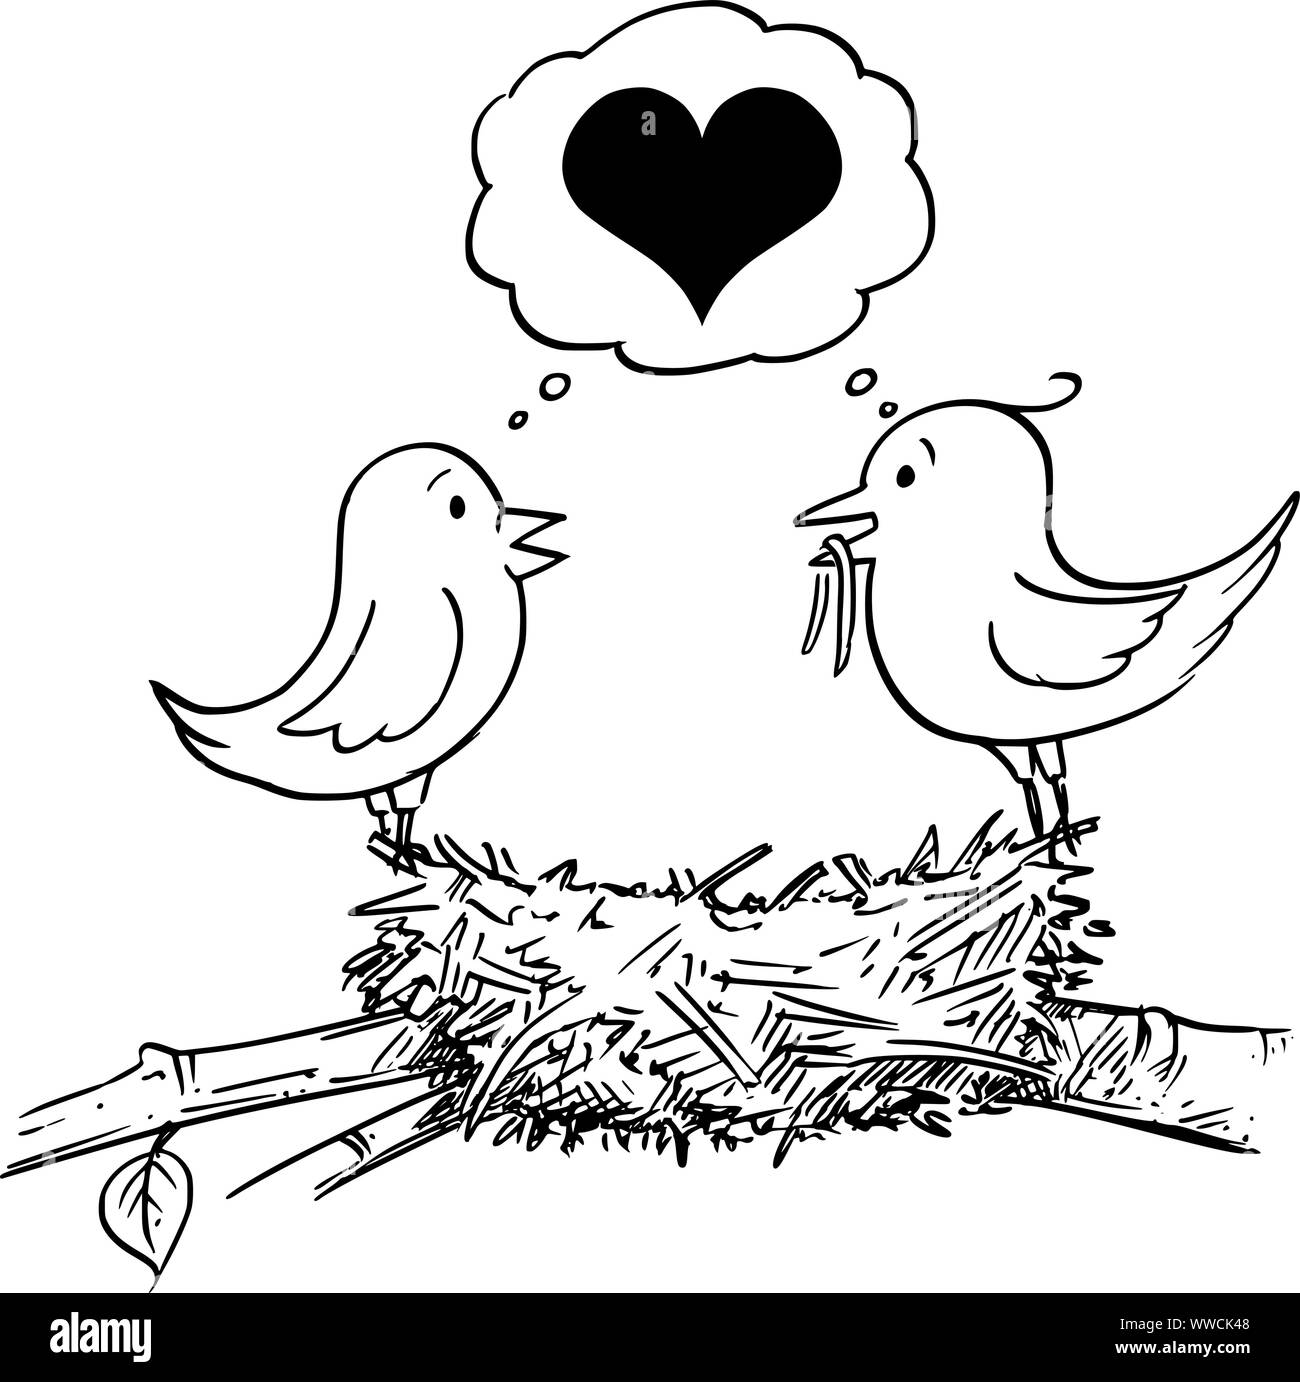 Vector cartoon drawing conceptual illustration of loving couple of male and female birds in love building nest and thinking together about heart symbol Stock Vector